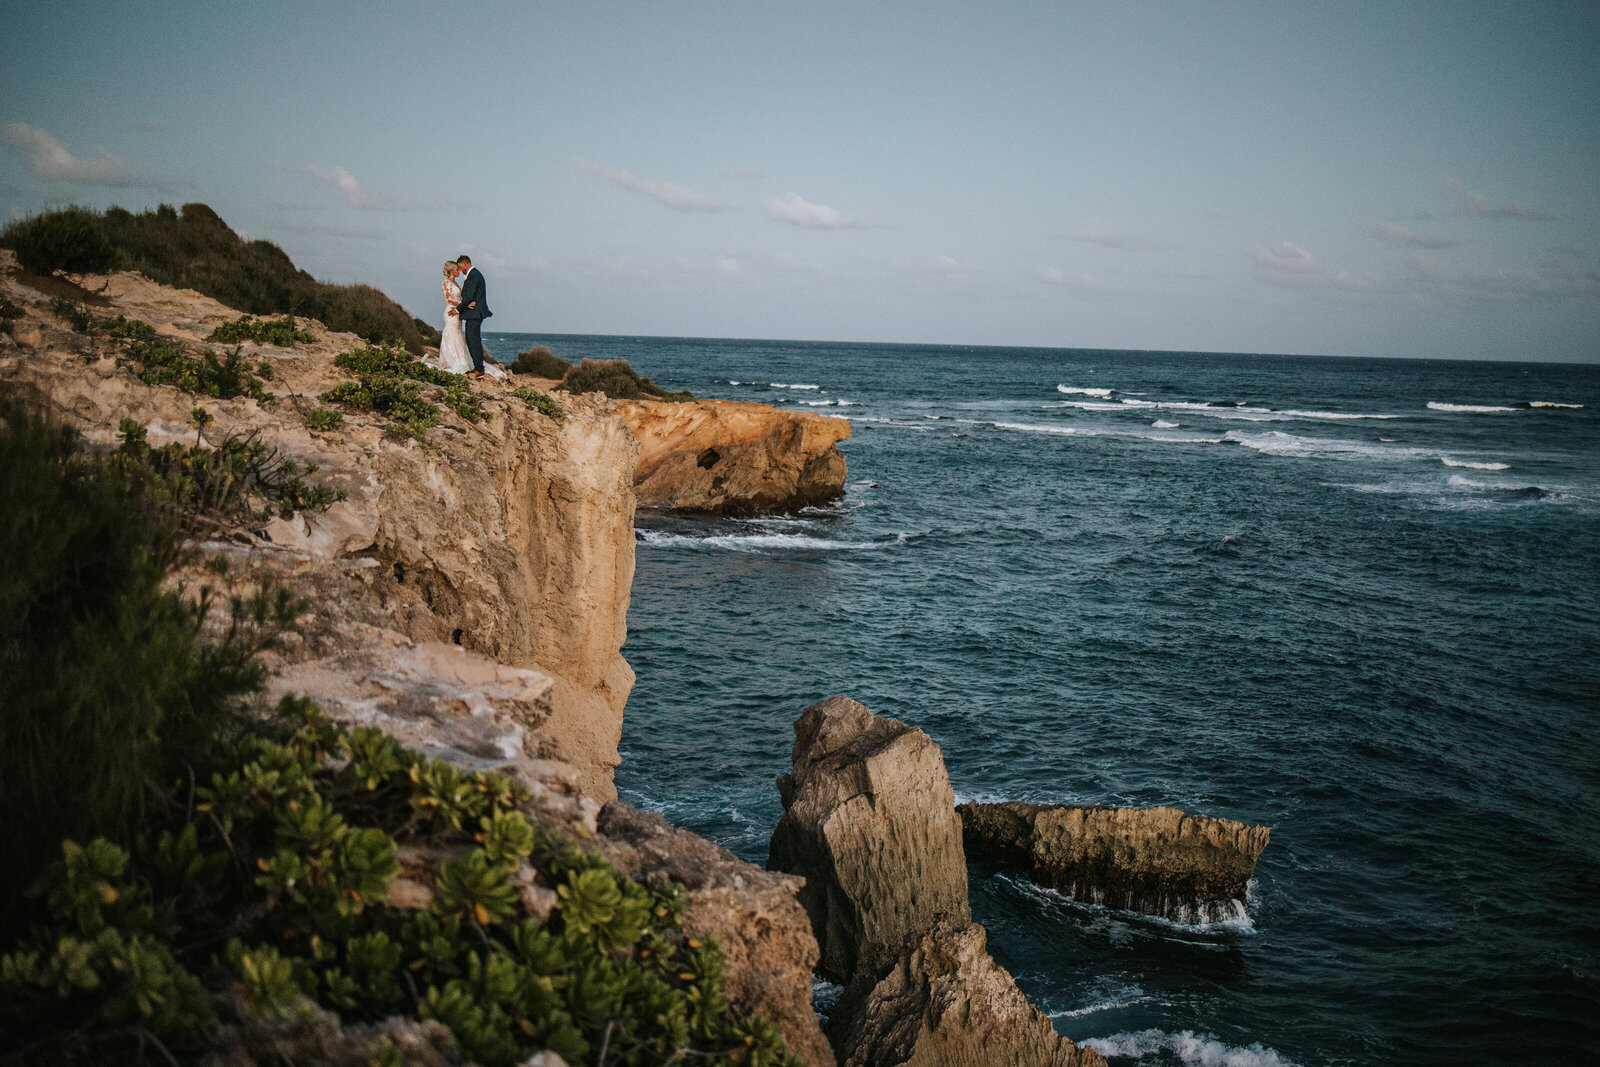 Beautiful couple standing on the cliff-side overlooking the ocean on their elopement wedding day.